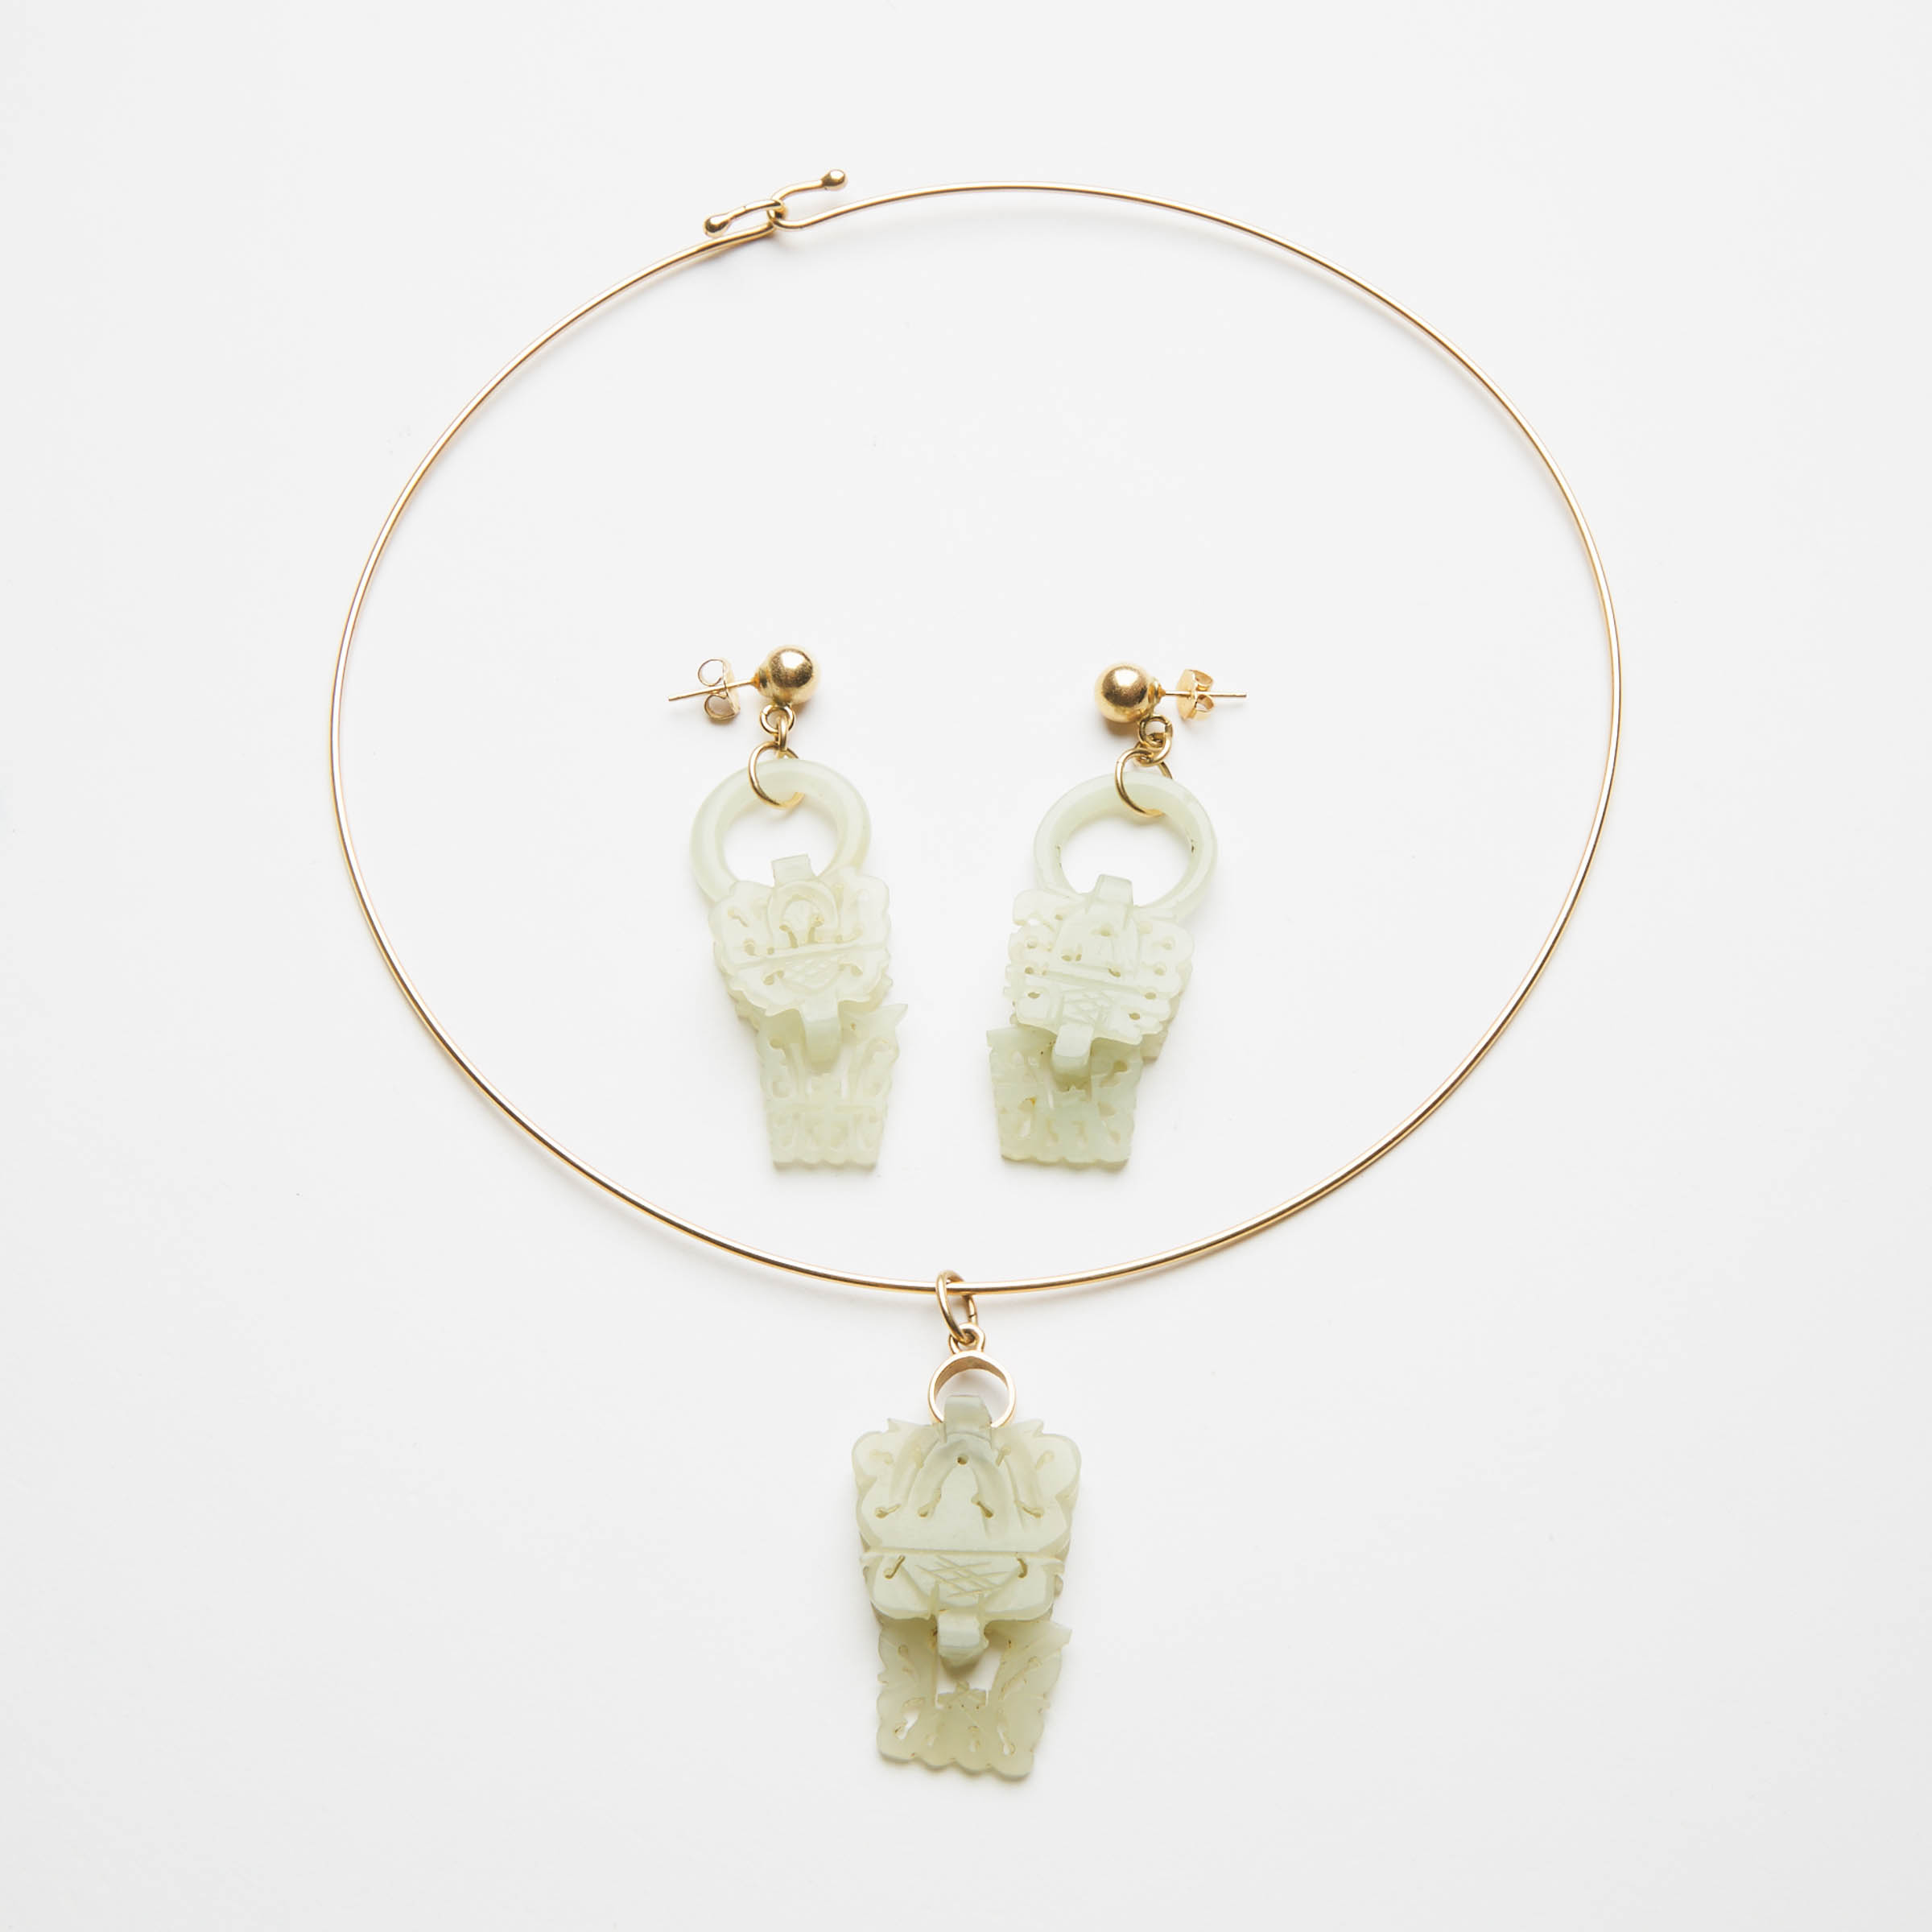 A White Jade 'Longevity' Necklace and Earring Set, 19th Century 